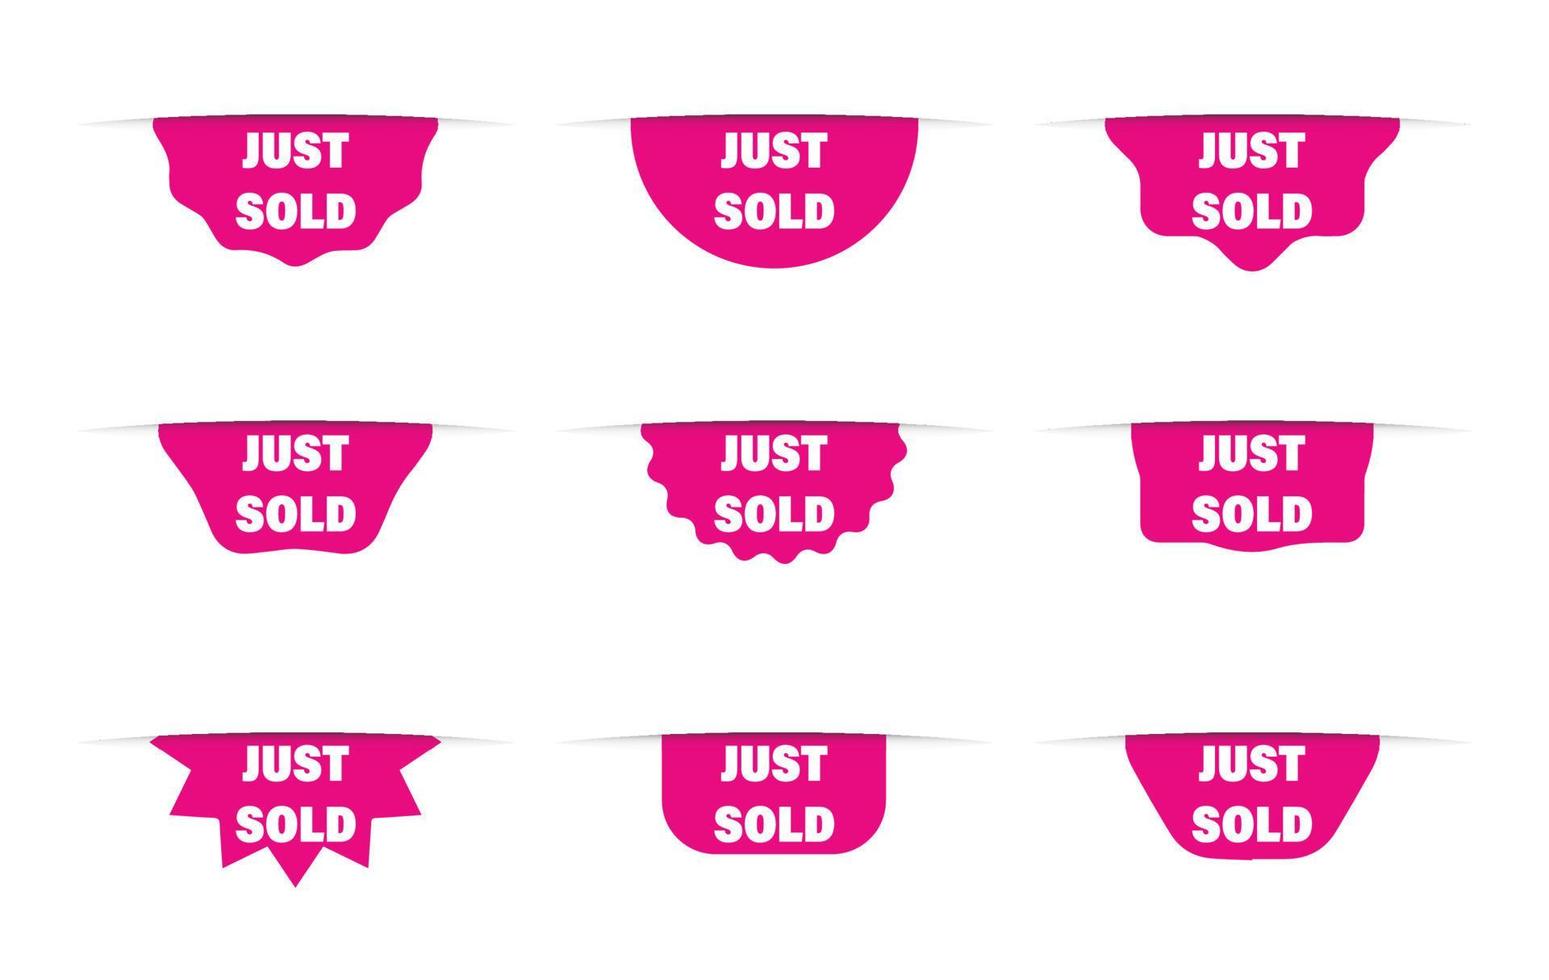 Just sold set of labels. Advertising icons that look from the side. Marketing red sings vector